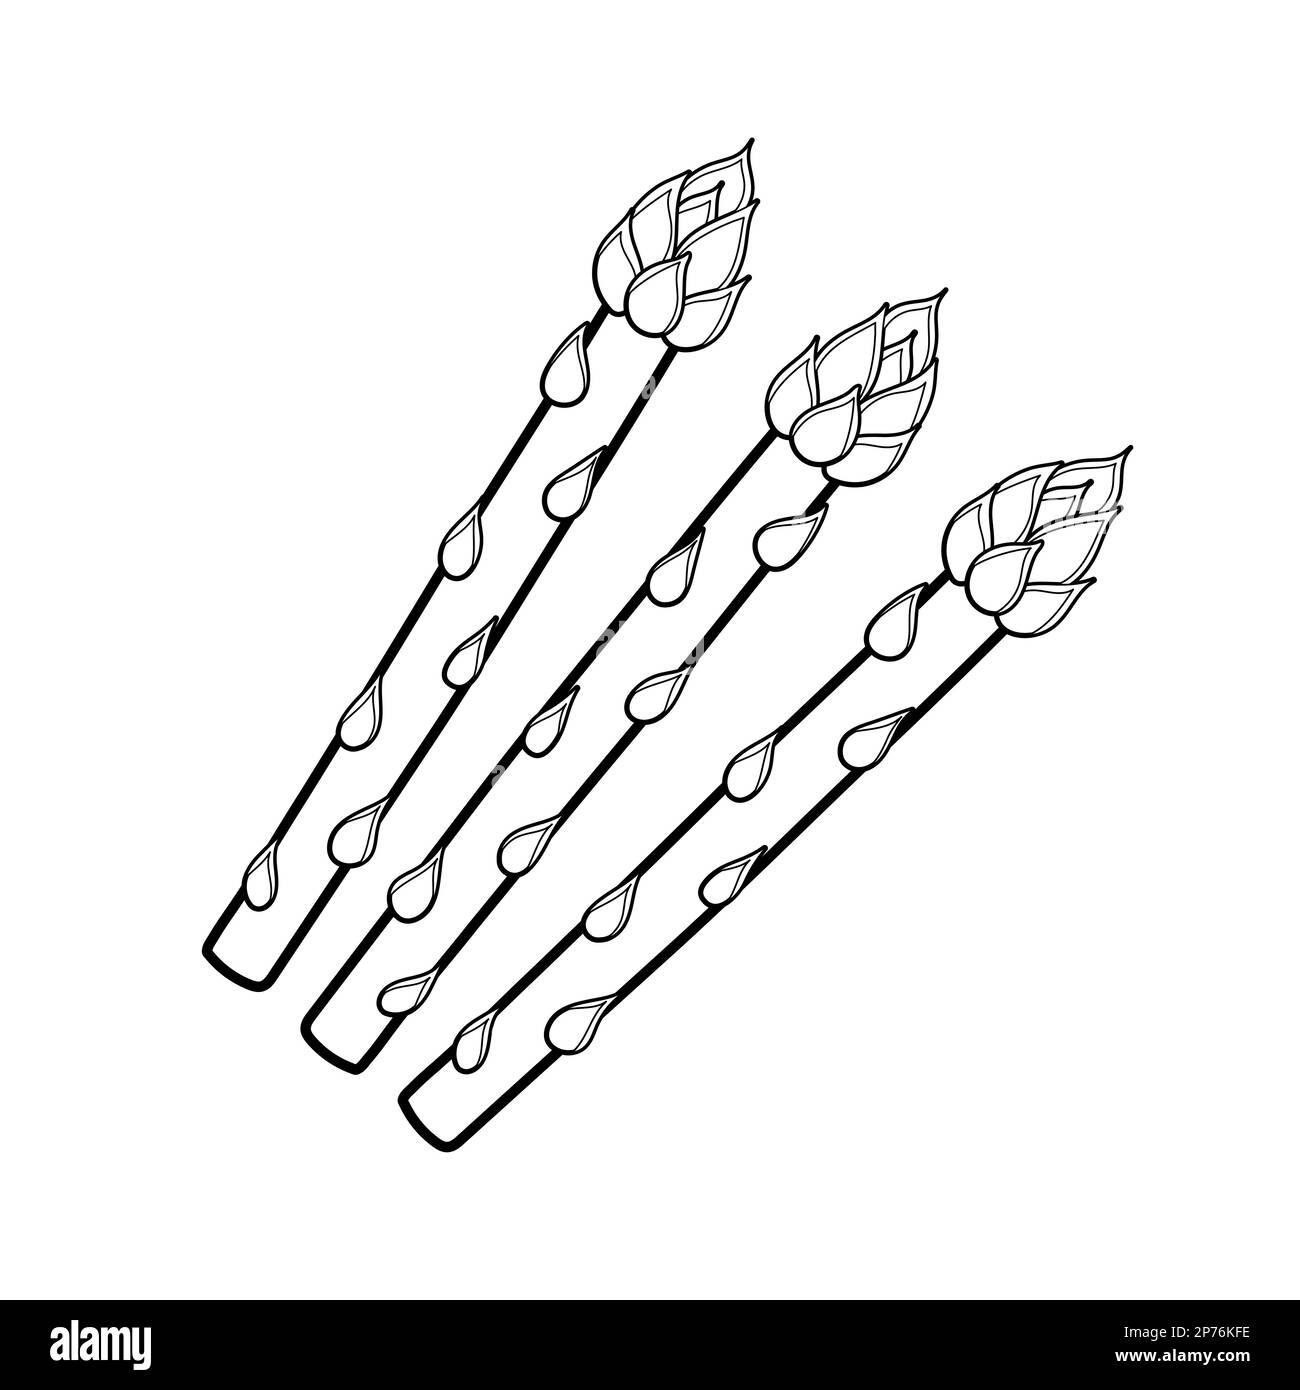 Asparagus coloring page for adults and kids. Black and white print Stock Vector